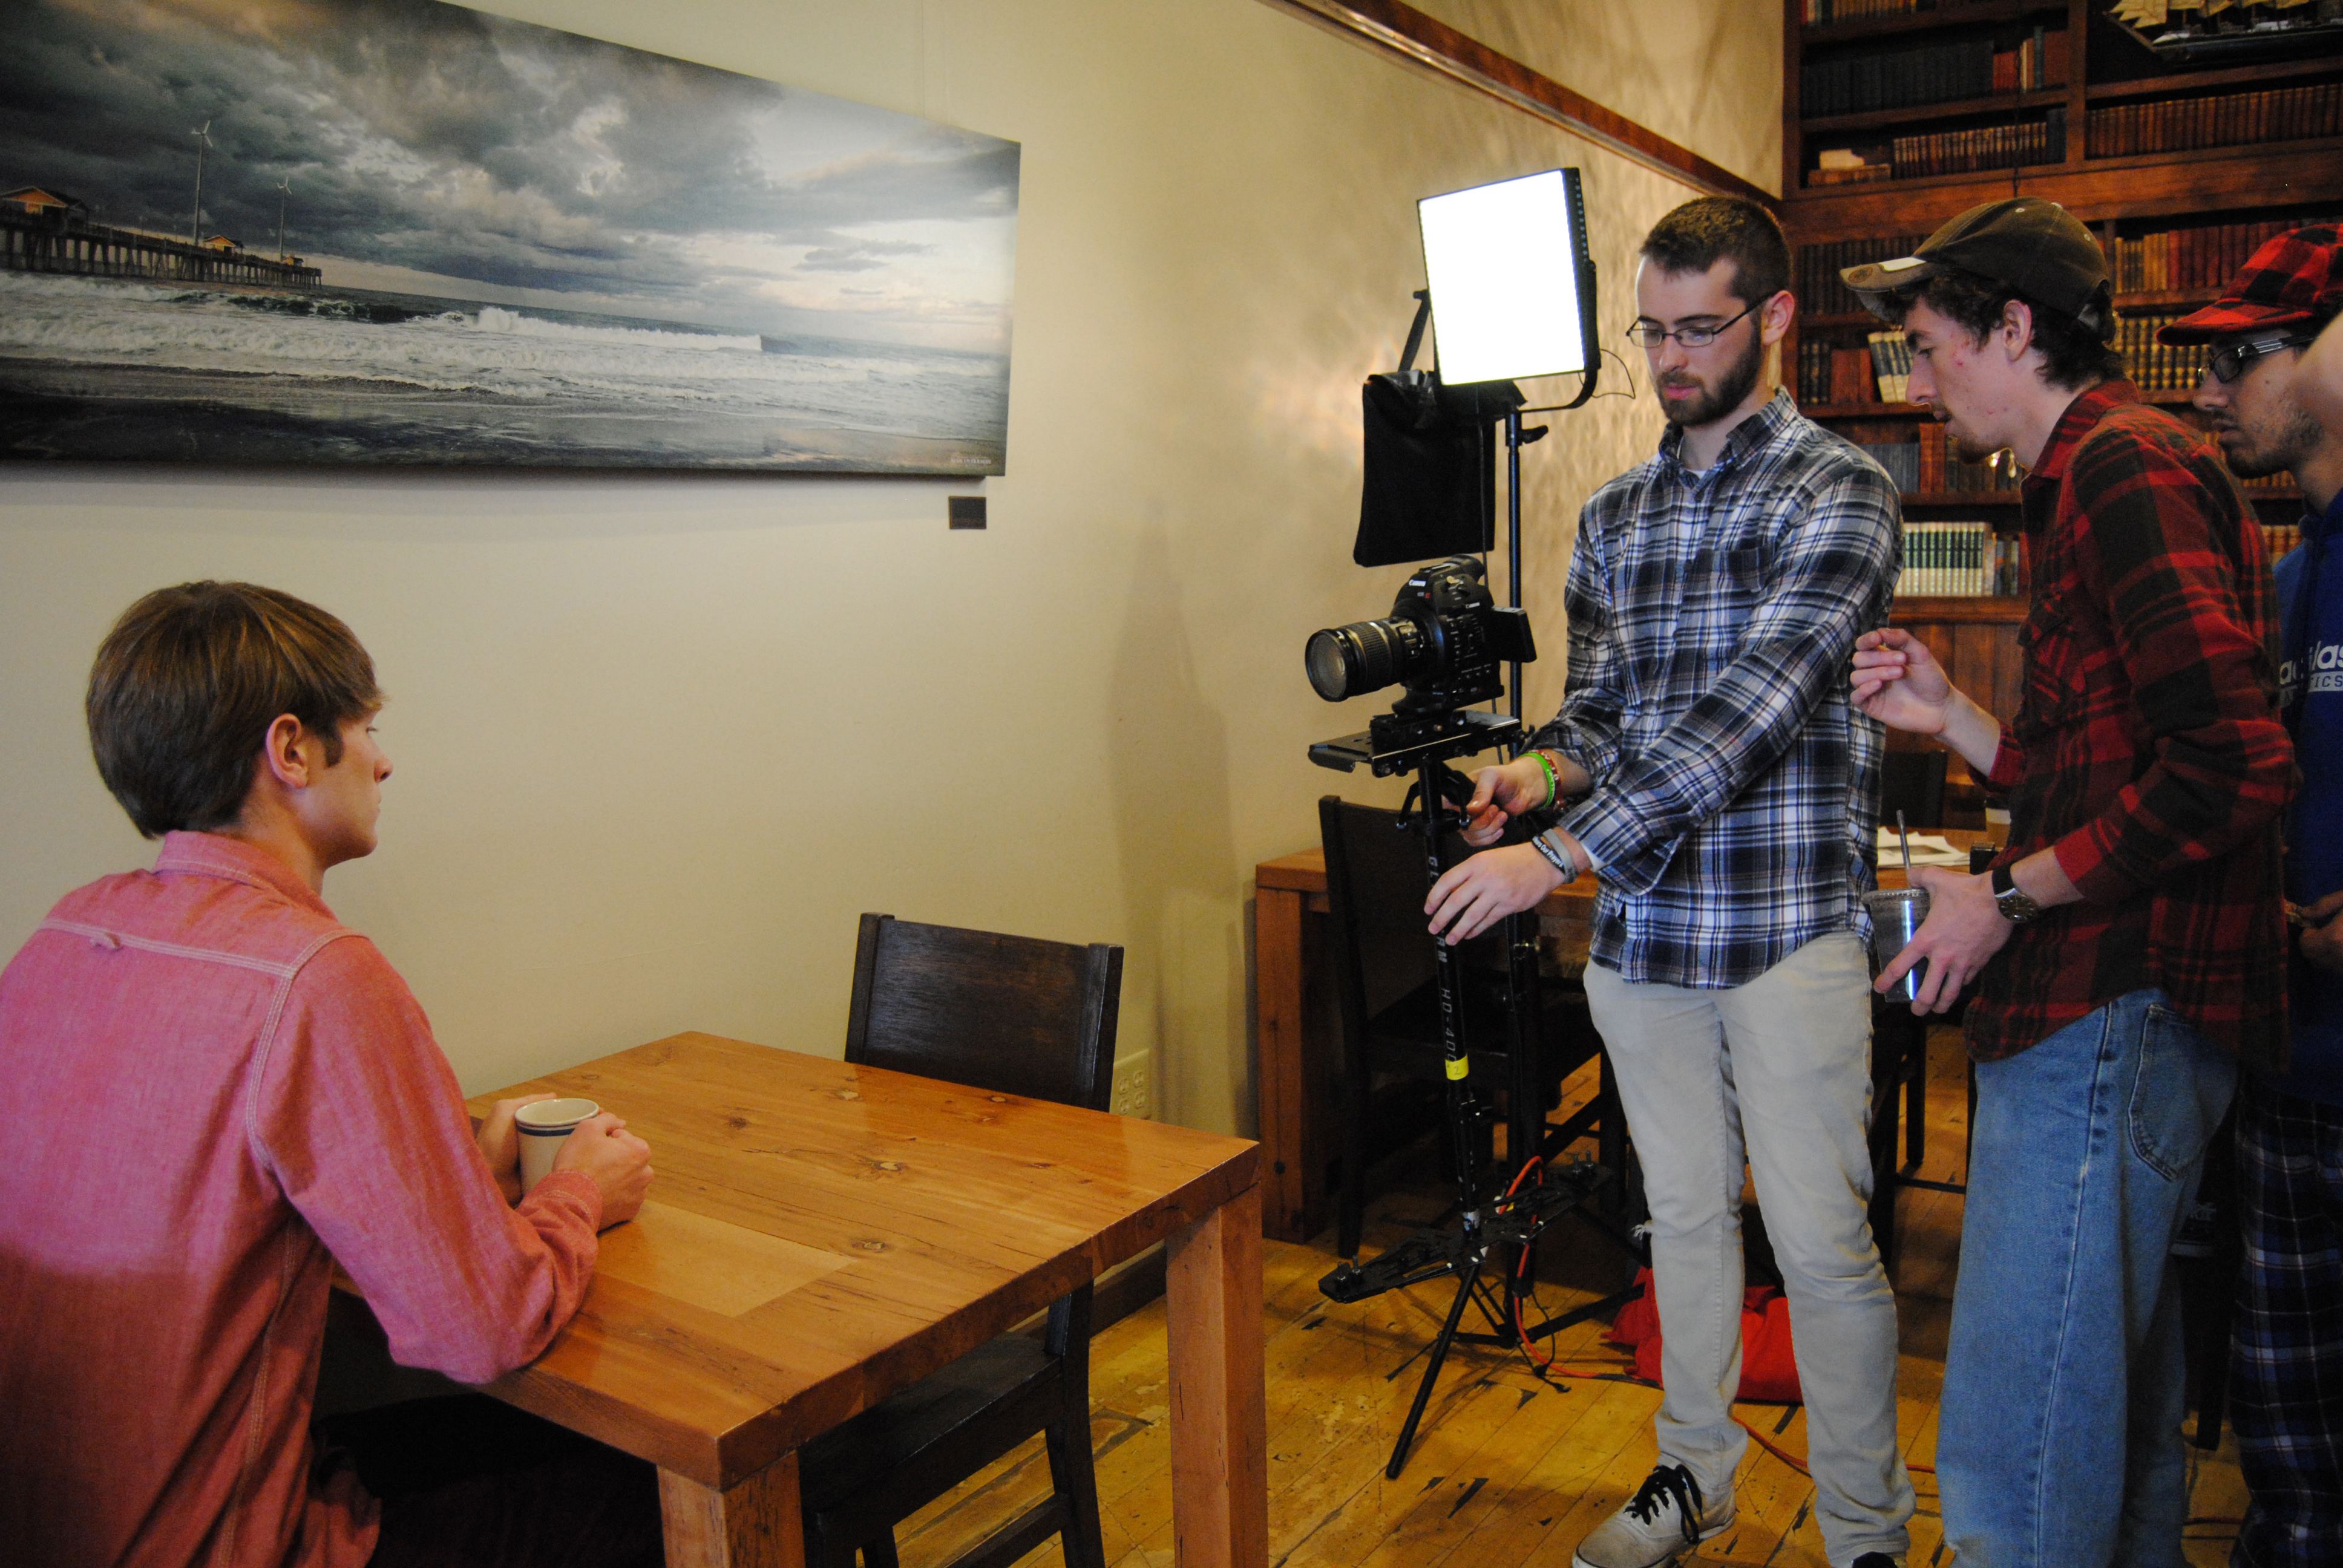 Director Blake Cortright [R] walks through a glide cam shot with Director of Photography Josiah Blizzard [M] on the set of Spilled Tea (2013).